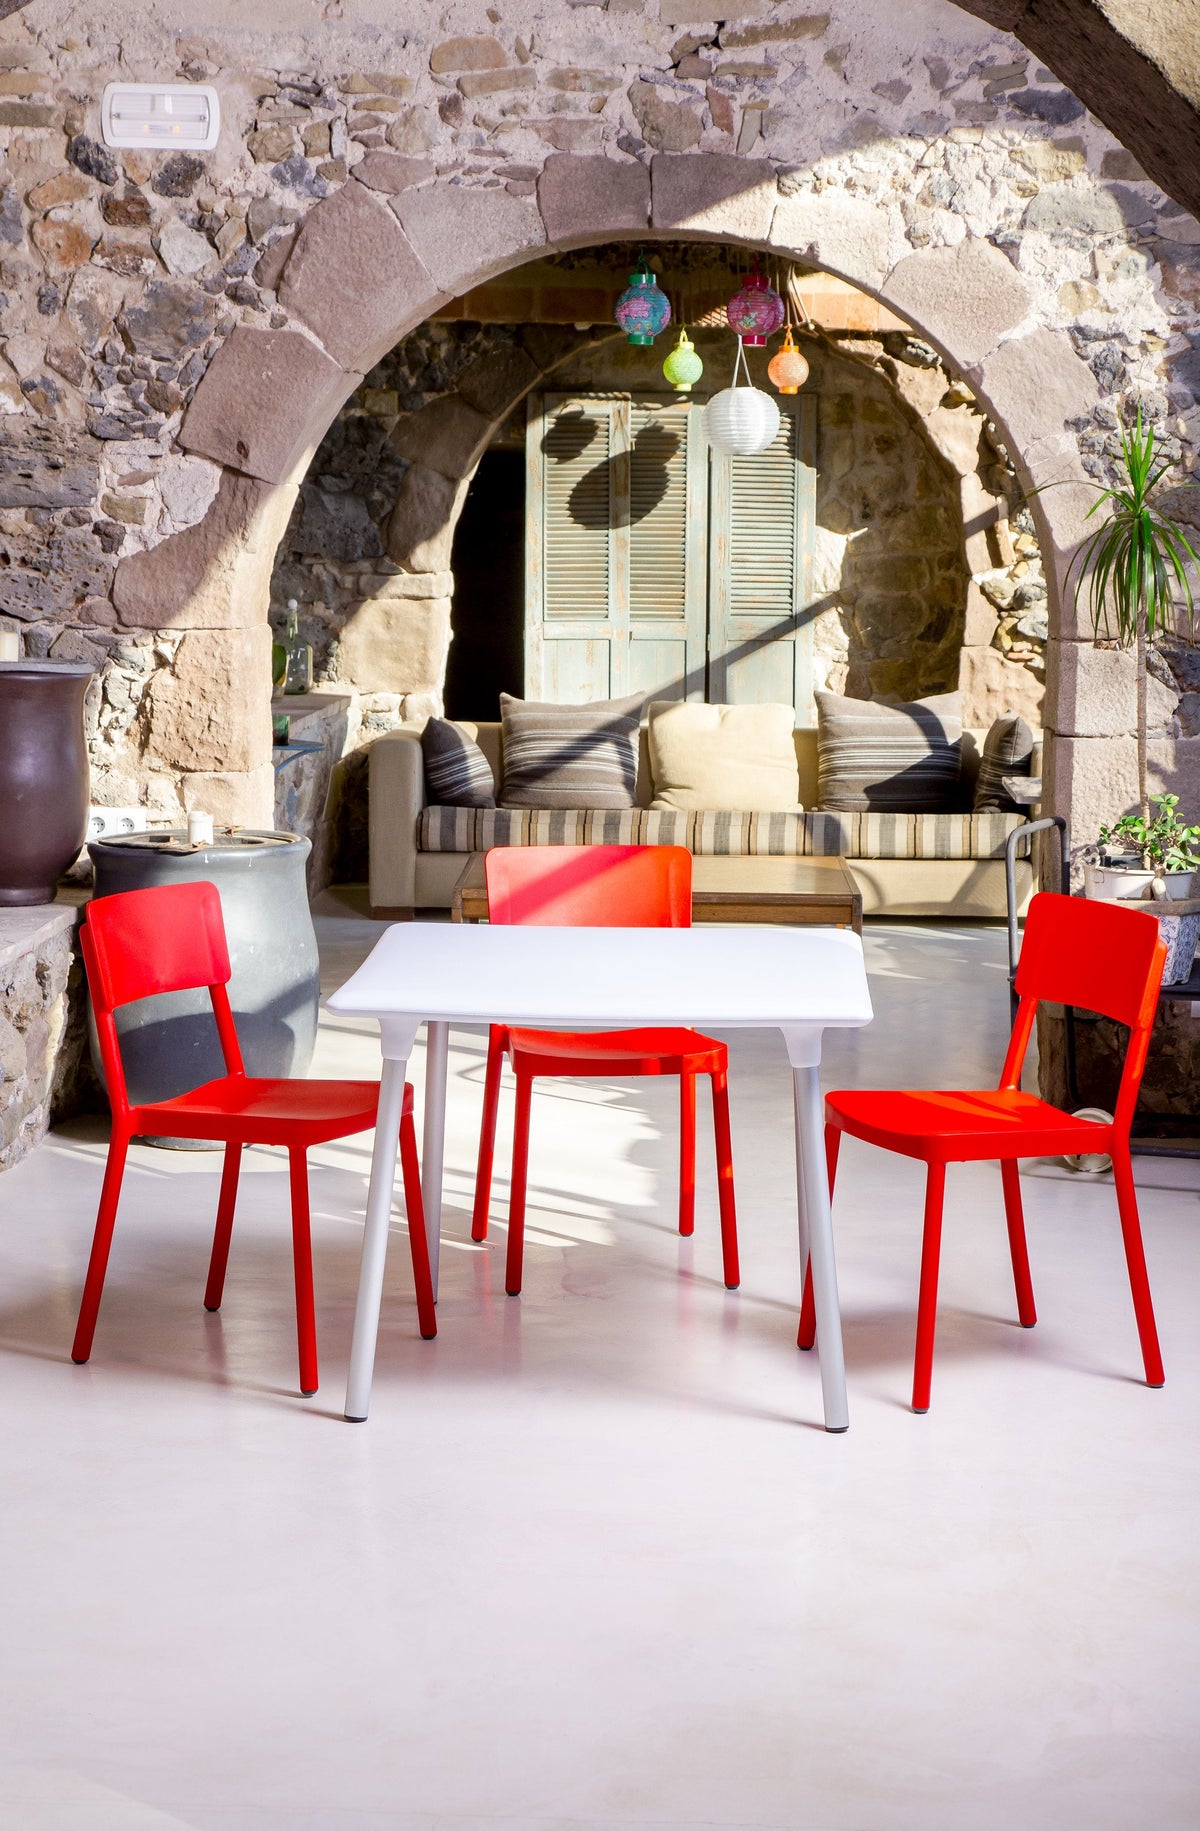 Lisboa Side Chair-Resol-Contract Furniture Store